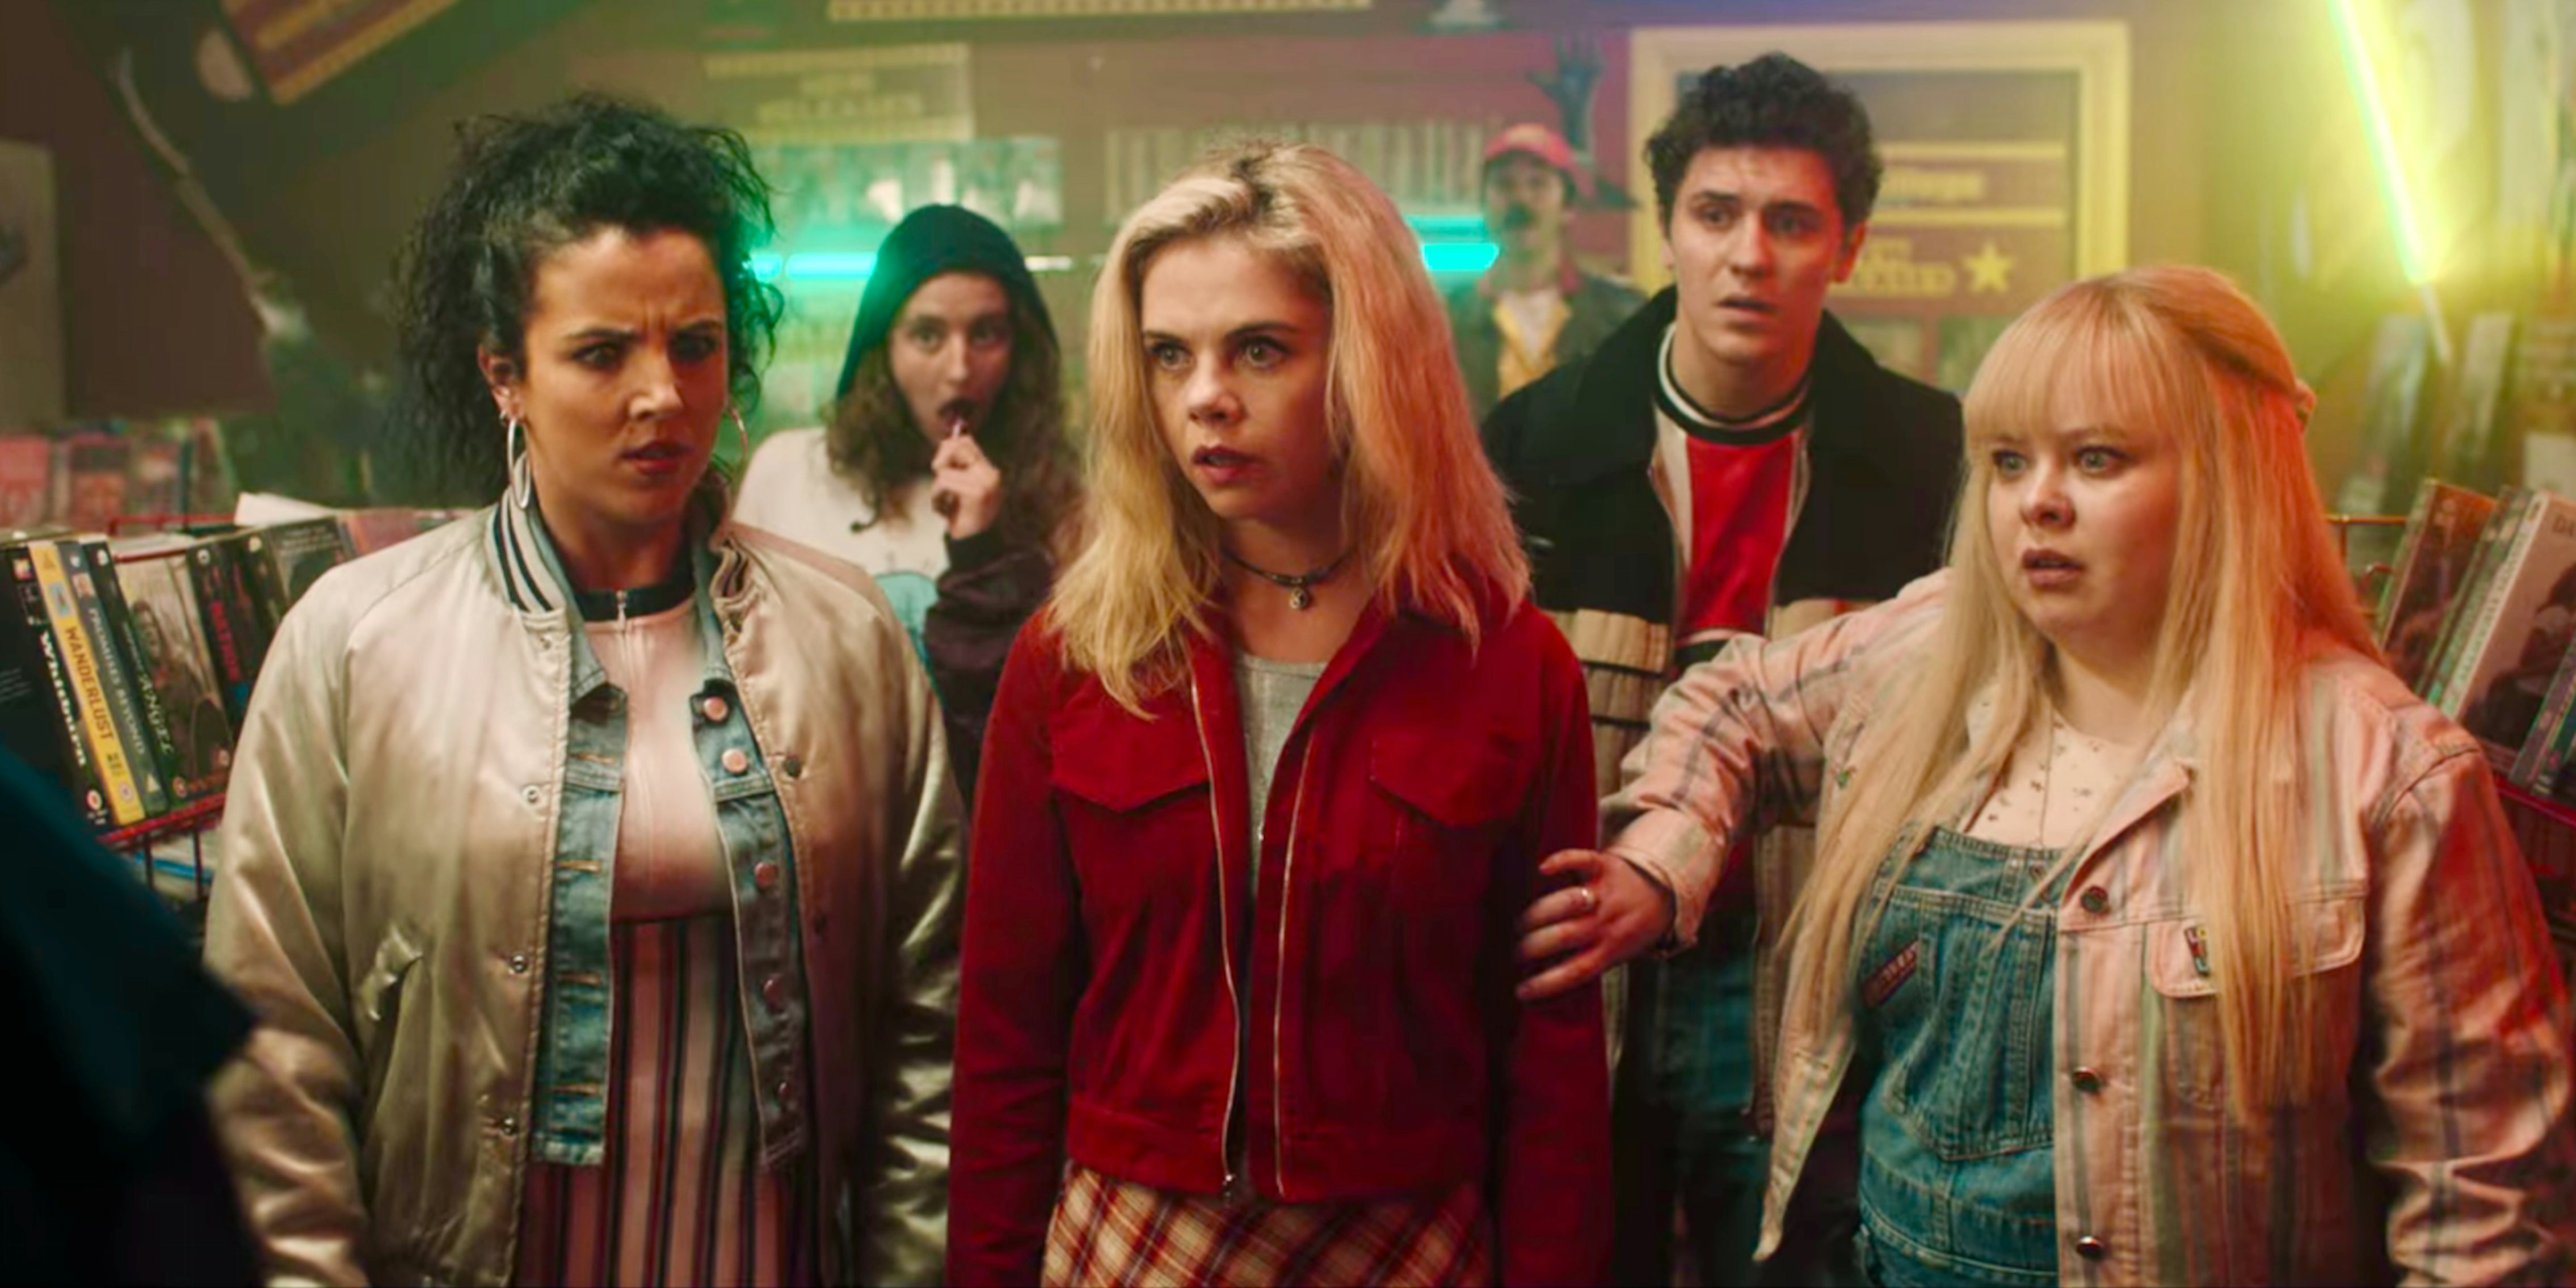 (l-r) michelle, orla, erin, james, and clare in derry girls season 3